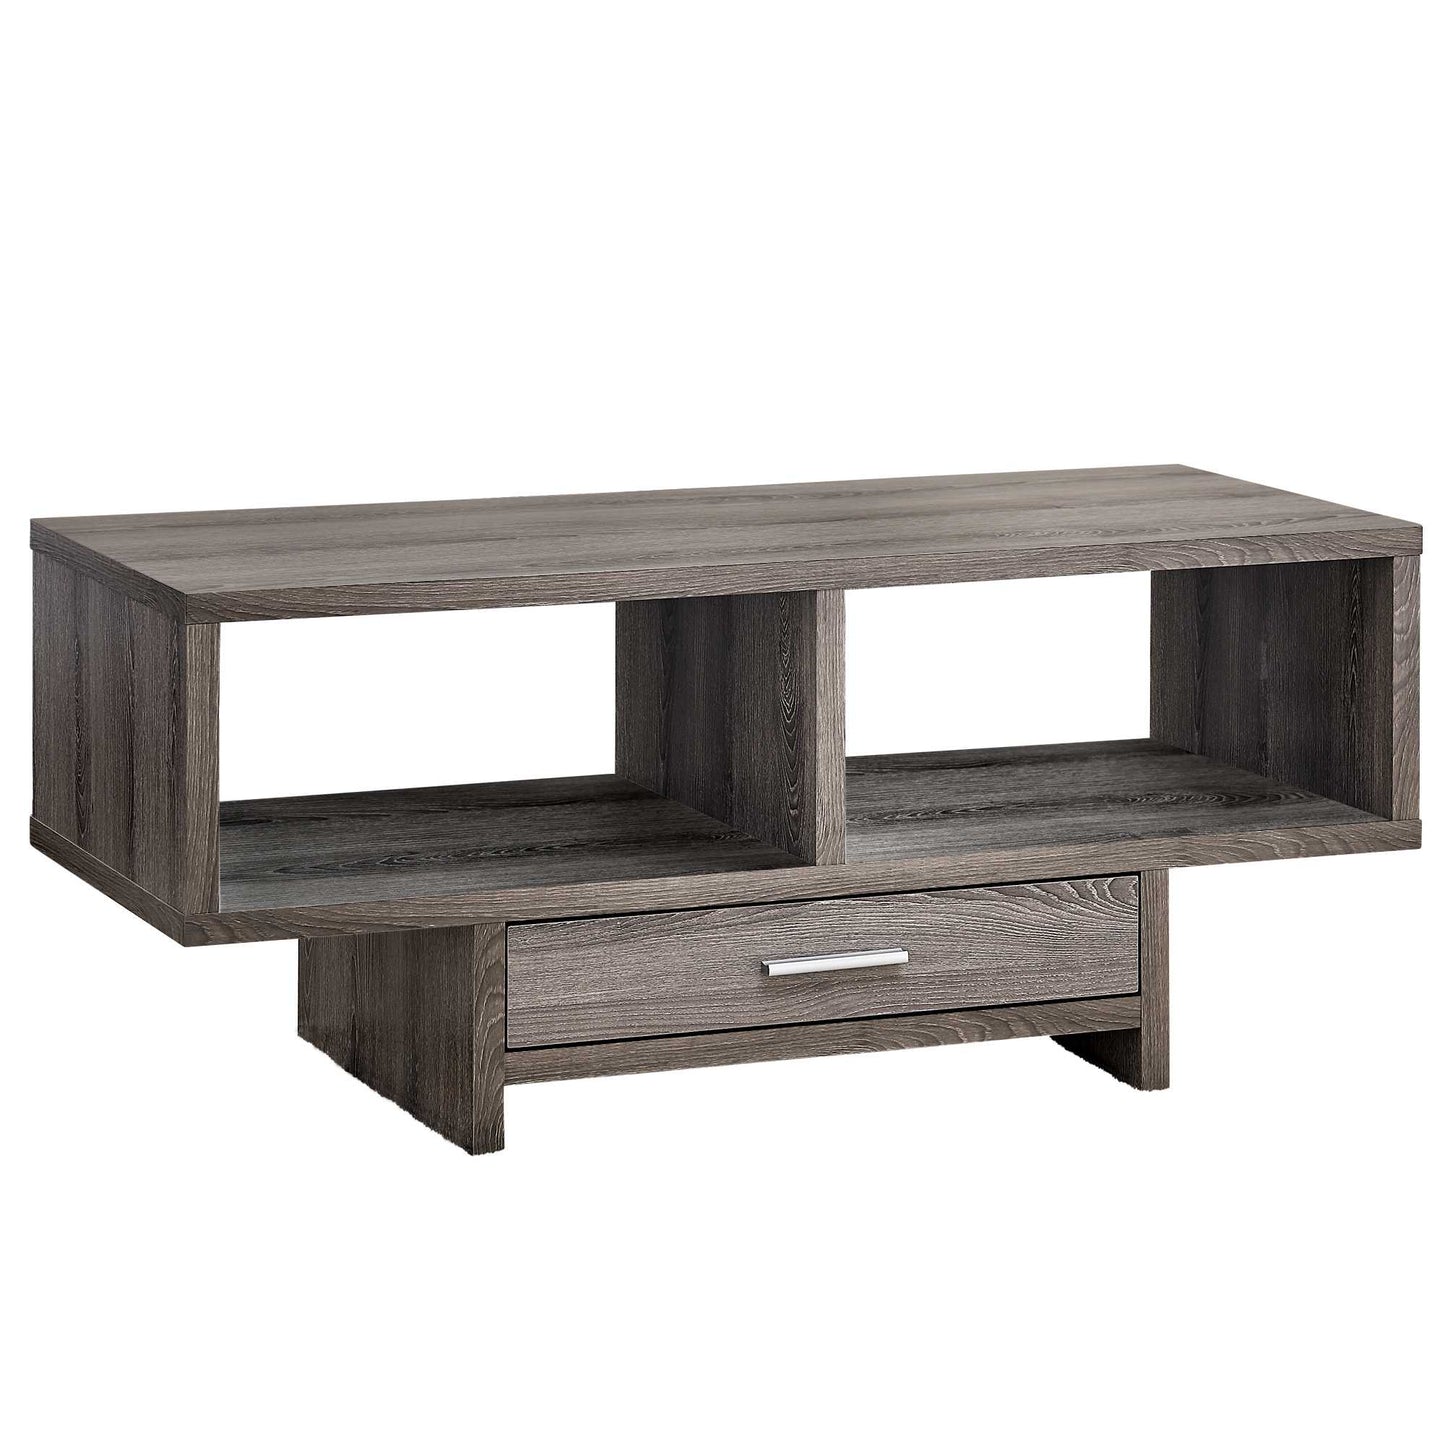 17.75" x 42.25" x 18" Dark Taupe With Storage - Coffee Table